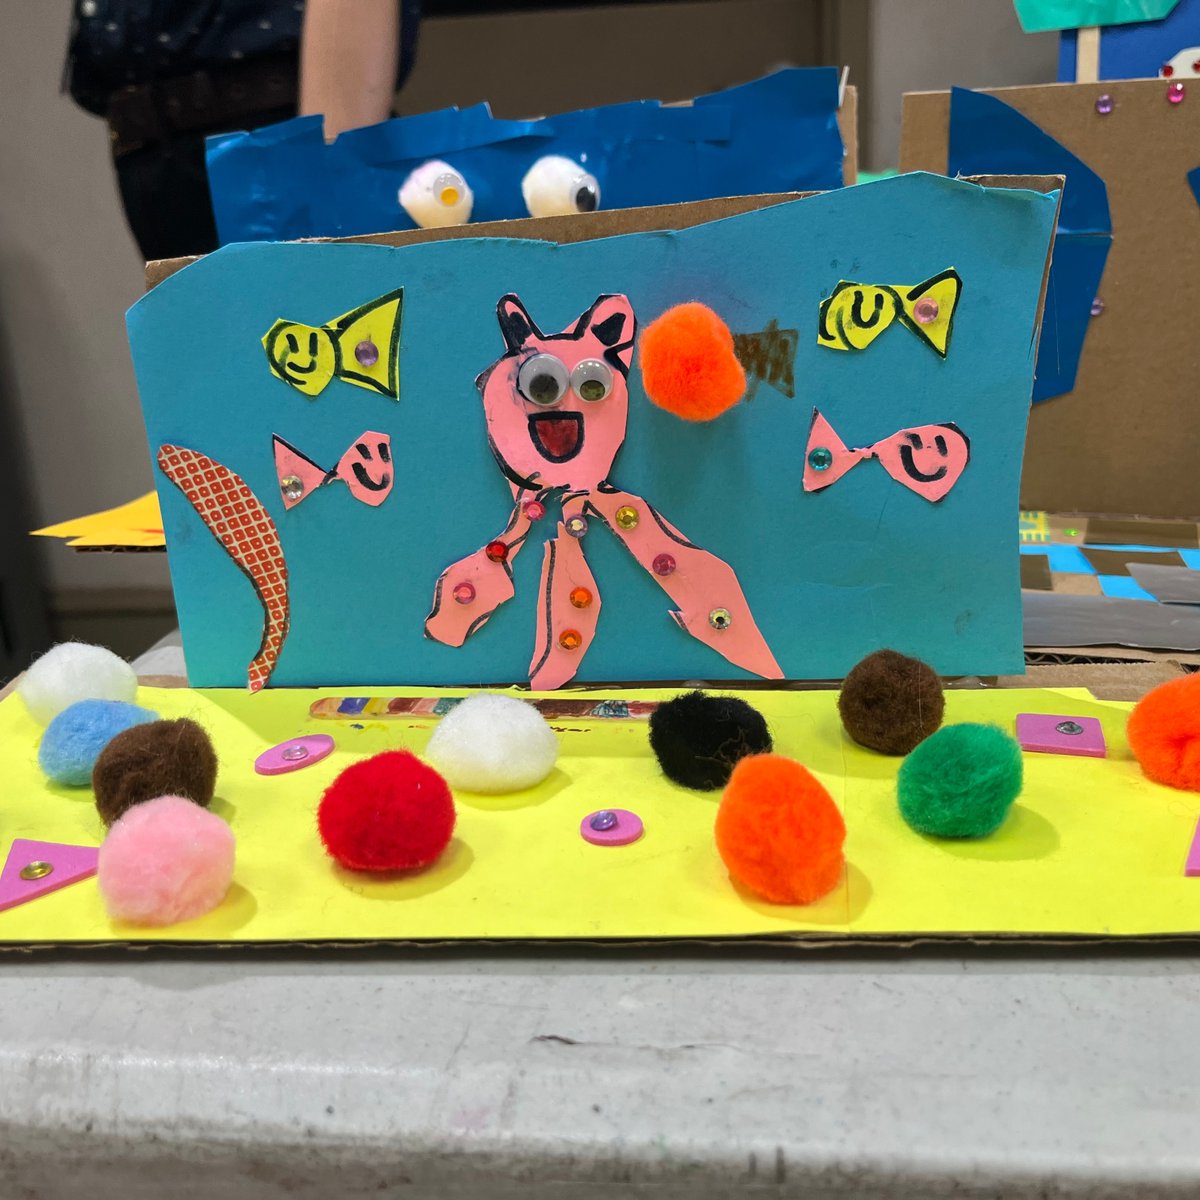 That's a wrap on Summer Camp week 1! Campers had so much fun making art in our studios and playing in Palumbo Park. See you next week for more art adventures!